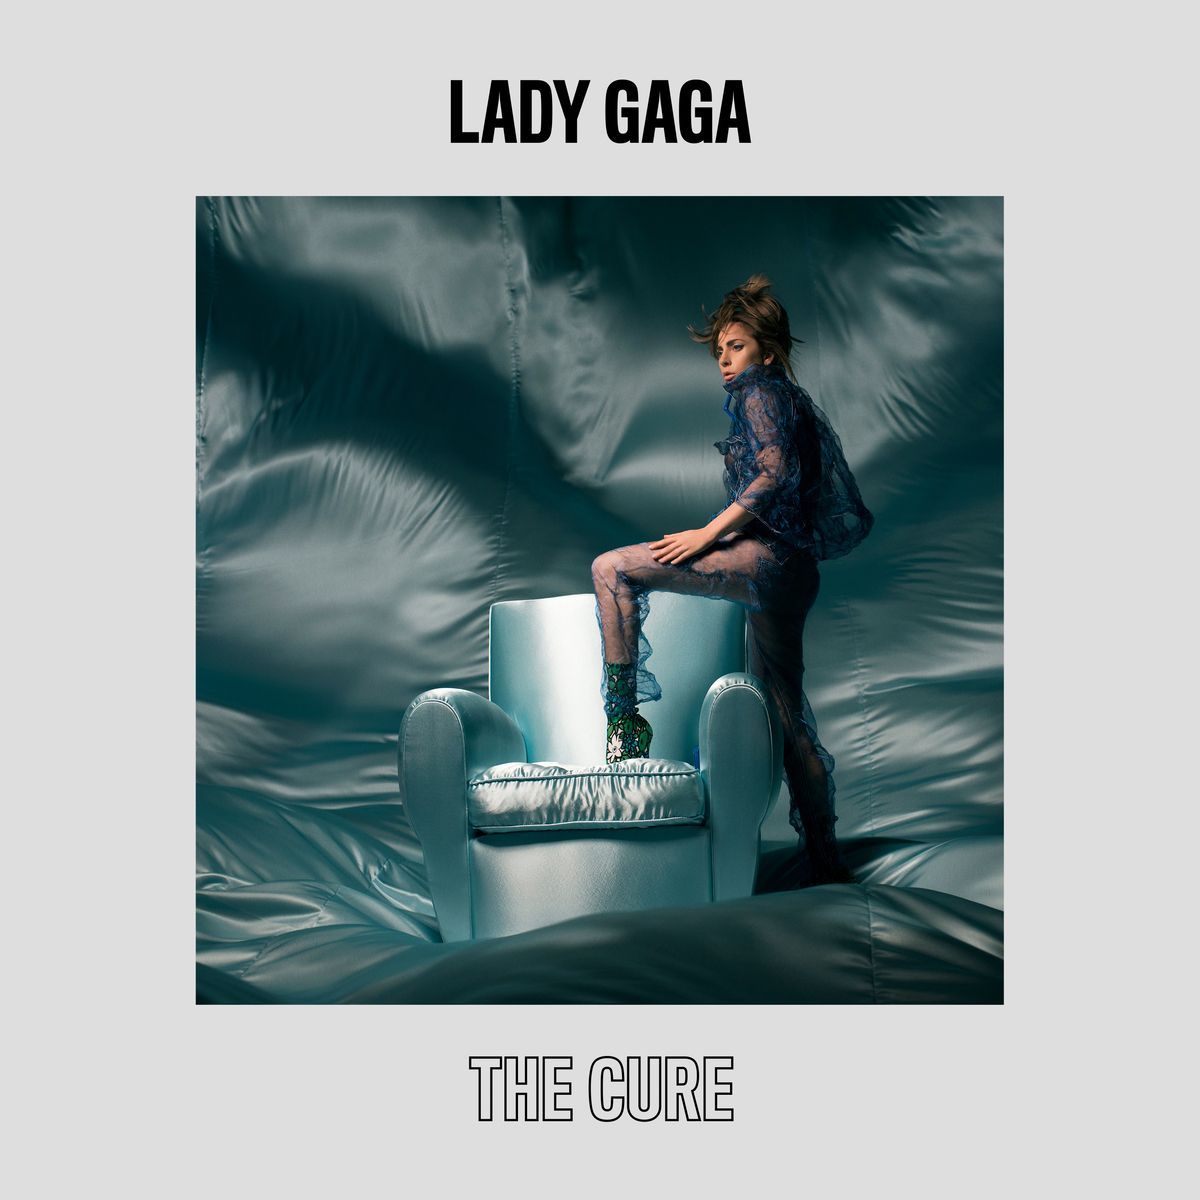 7 years ago today, Lady Gaga debuted 'The Cure' as a standalone single at the 2017 Coachella.